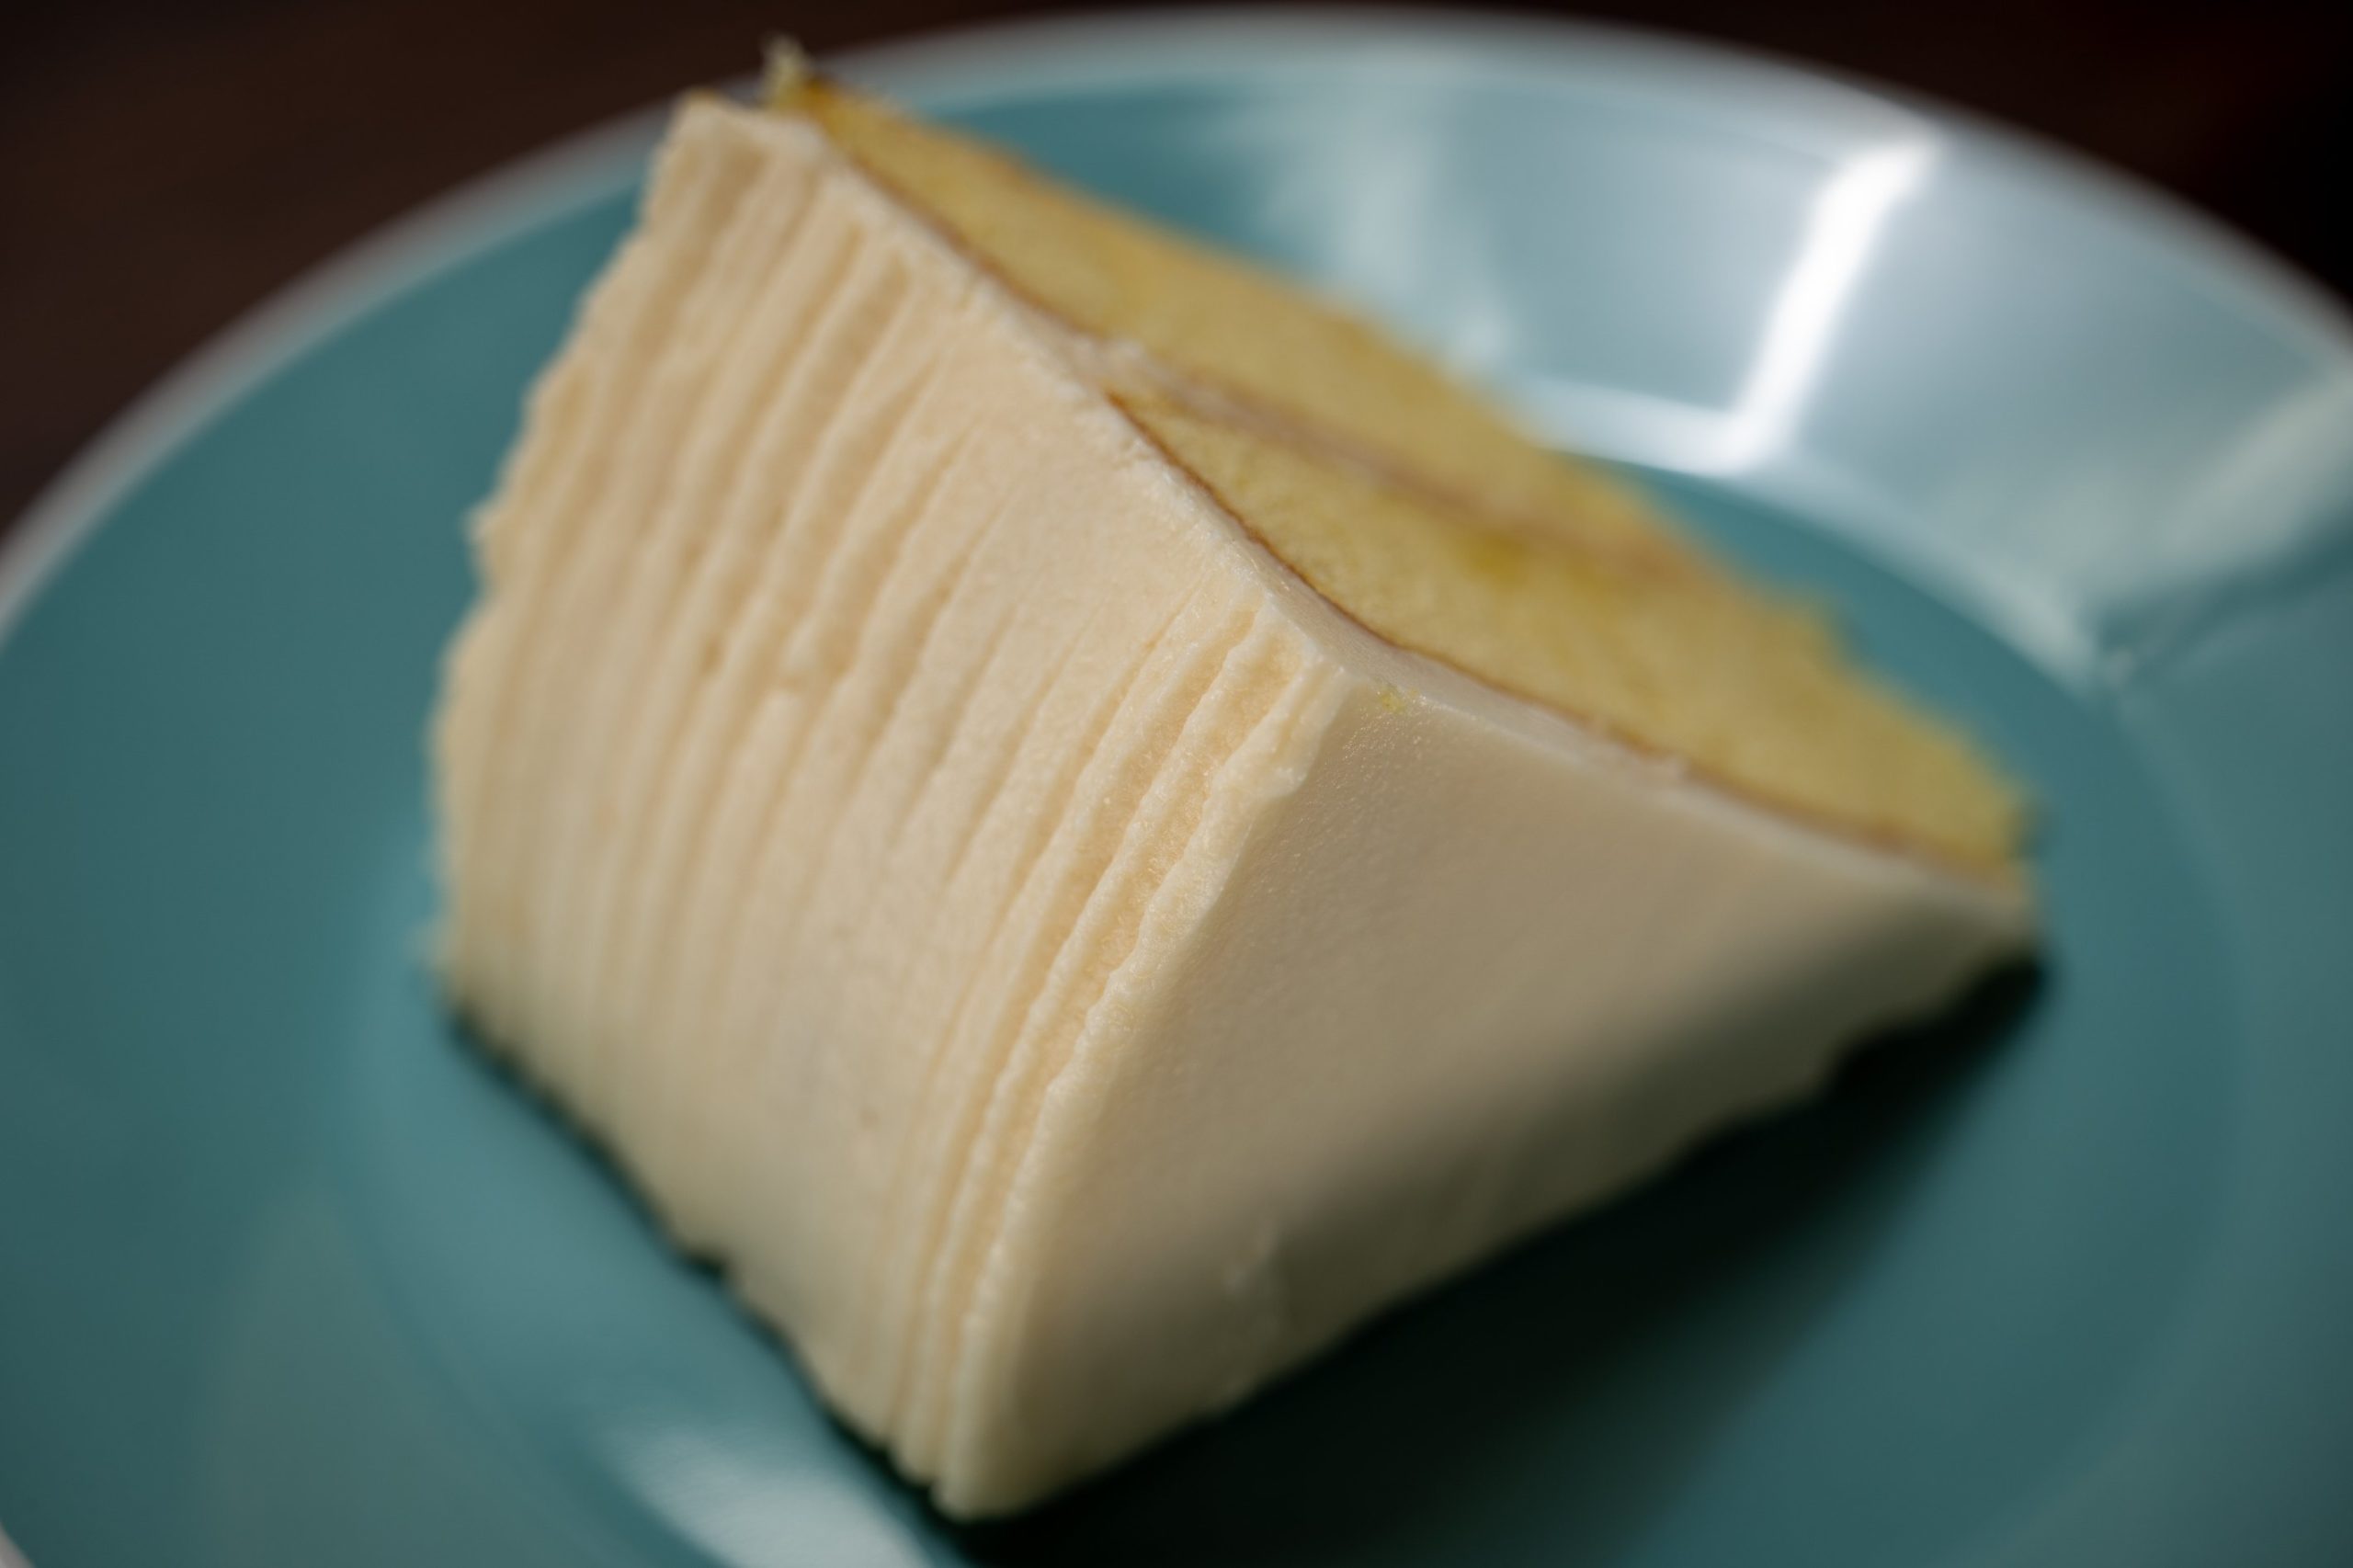 American Butter(milk)cream on a slice of Alton Brown's gold cake plated on teal plate.